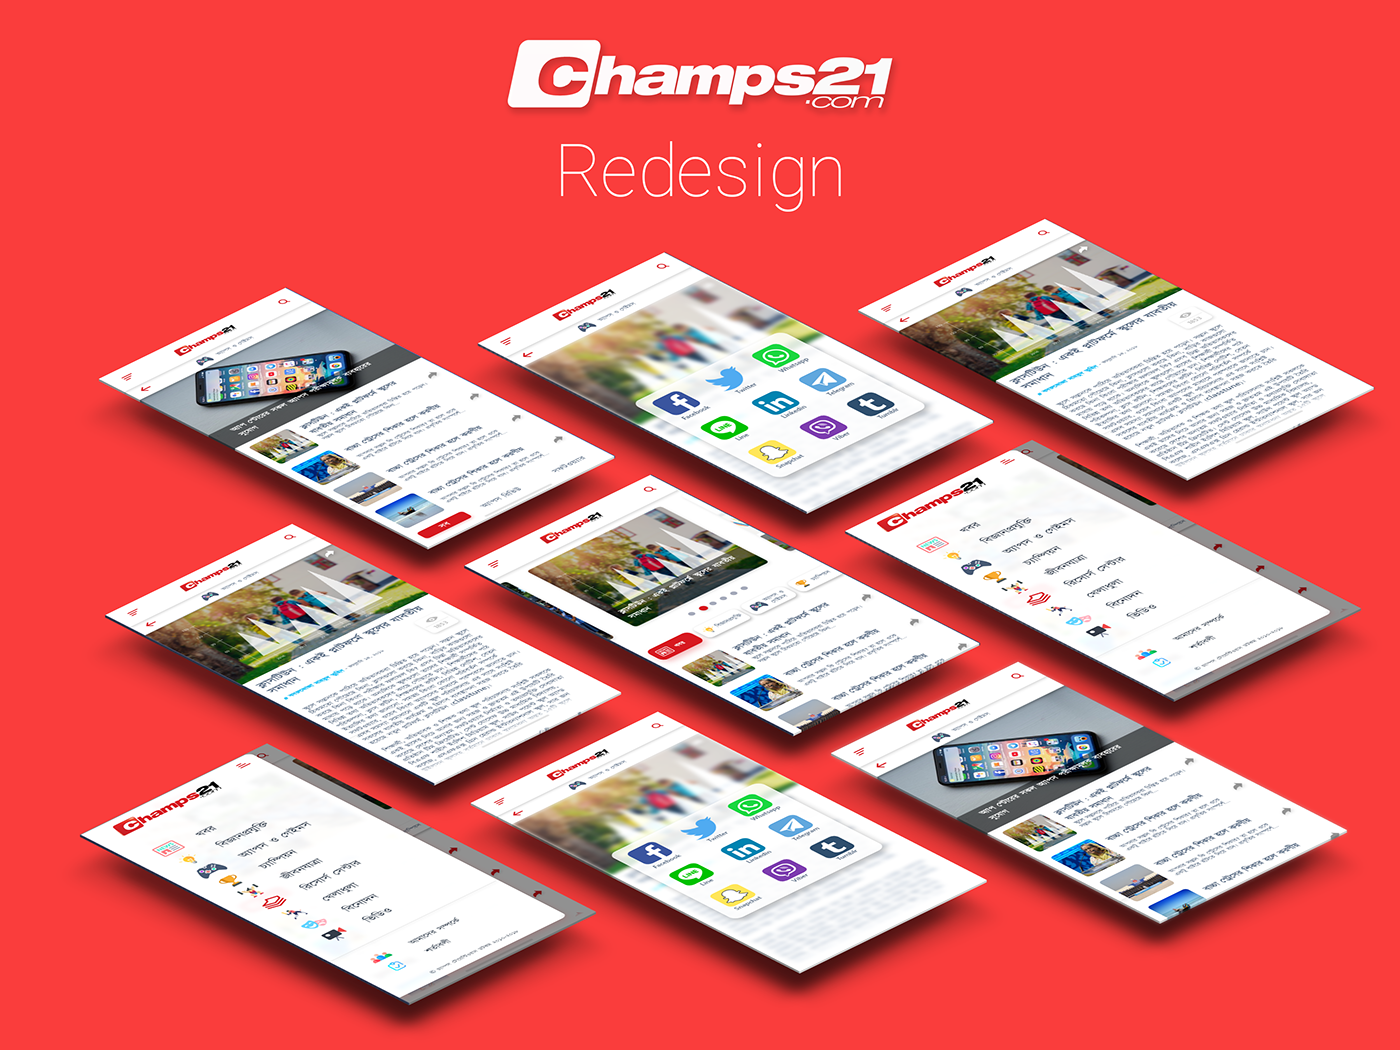 adobexd champs21 Edutech information portal UI/UX user interface user experience ios android